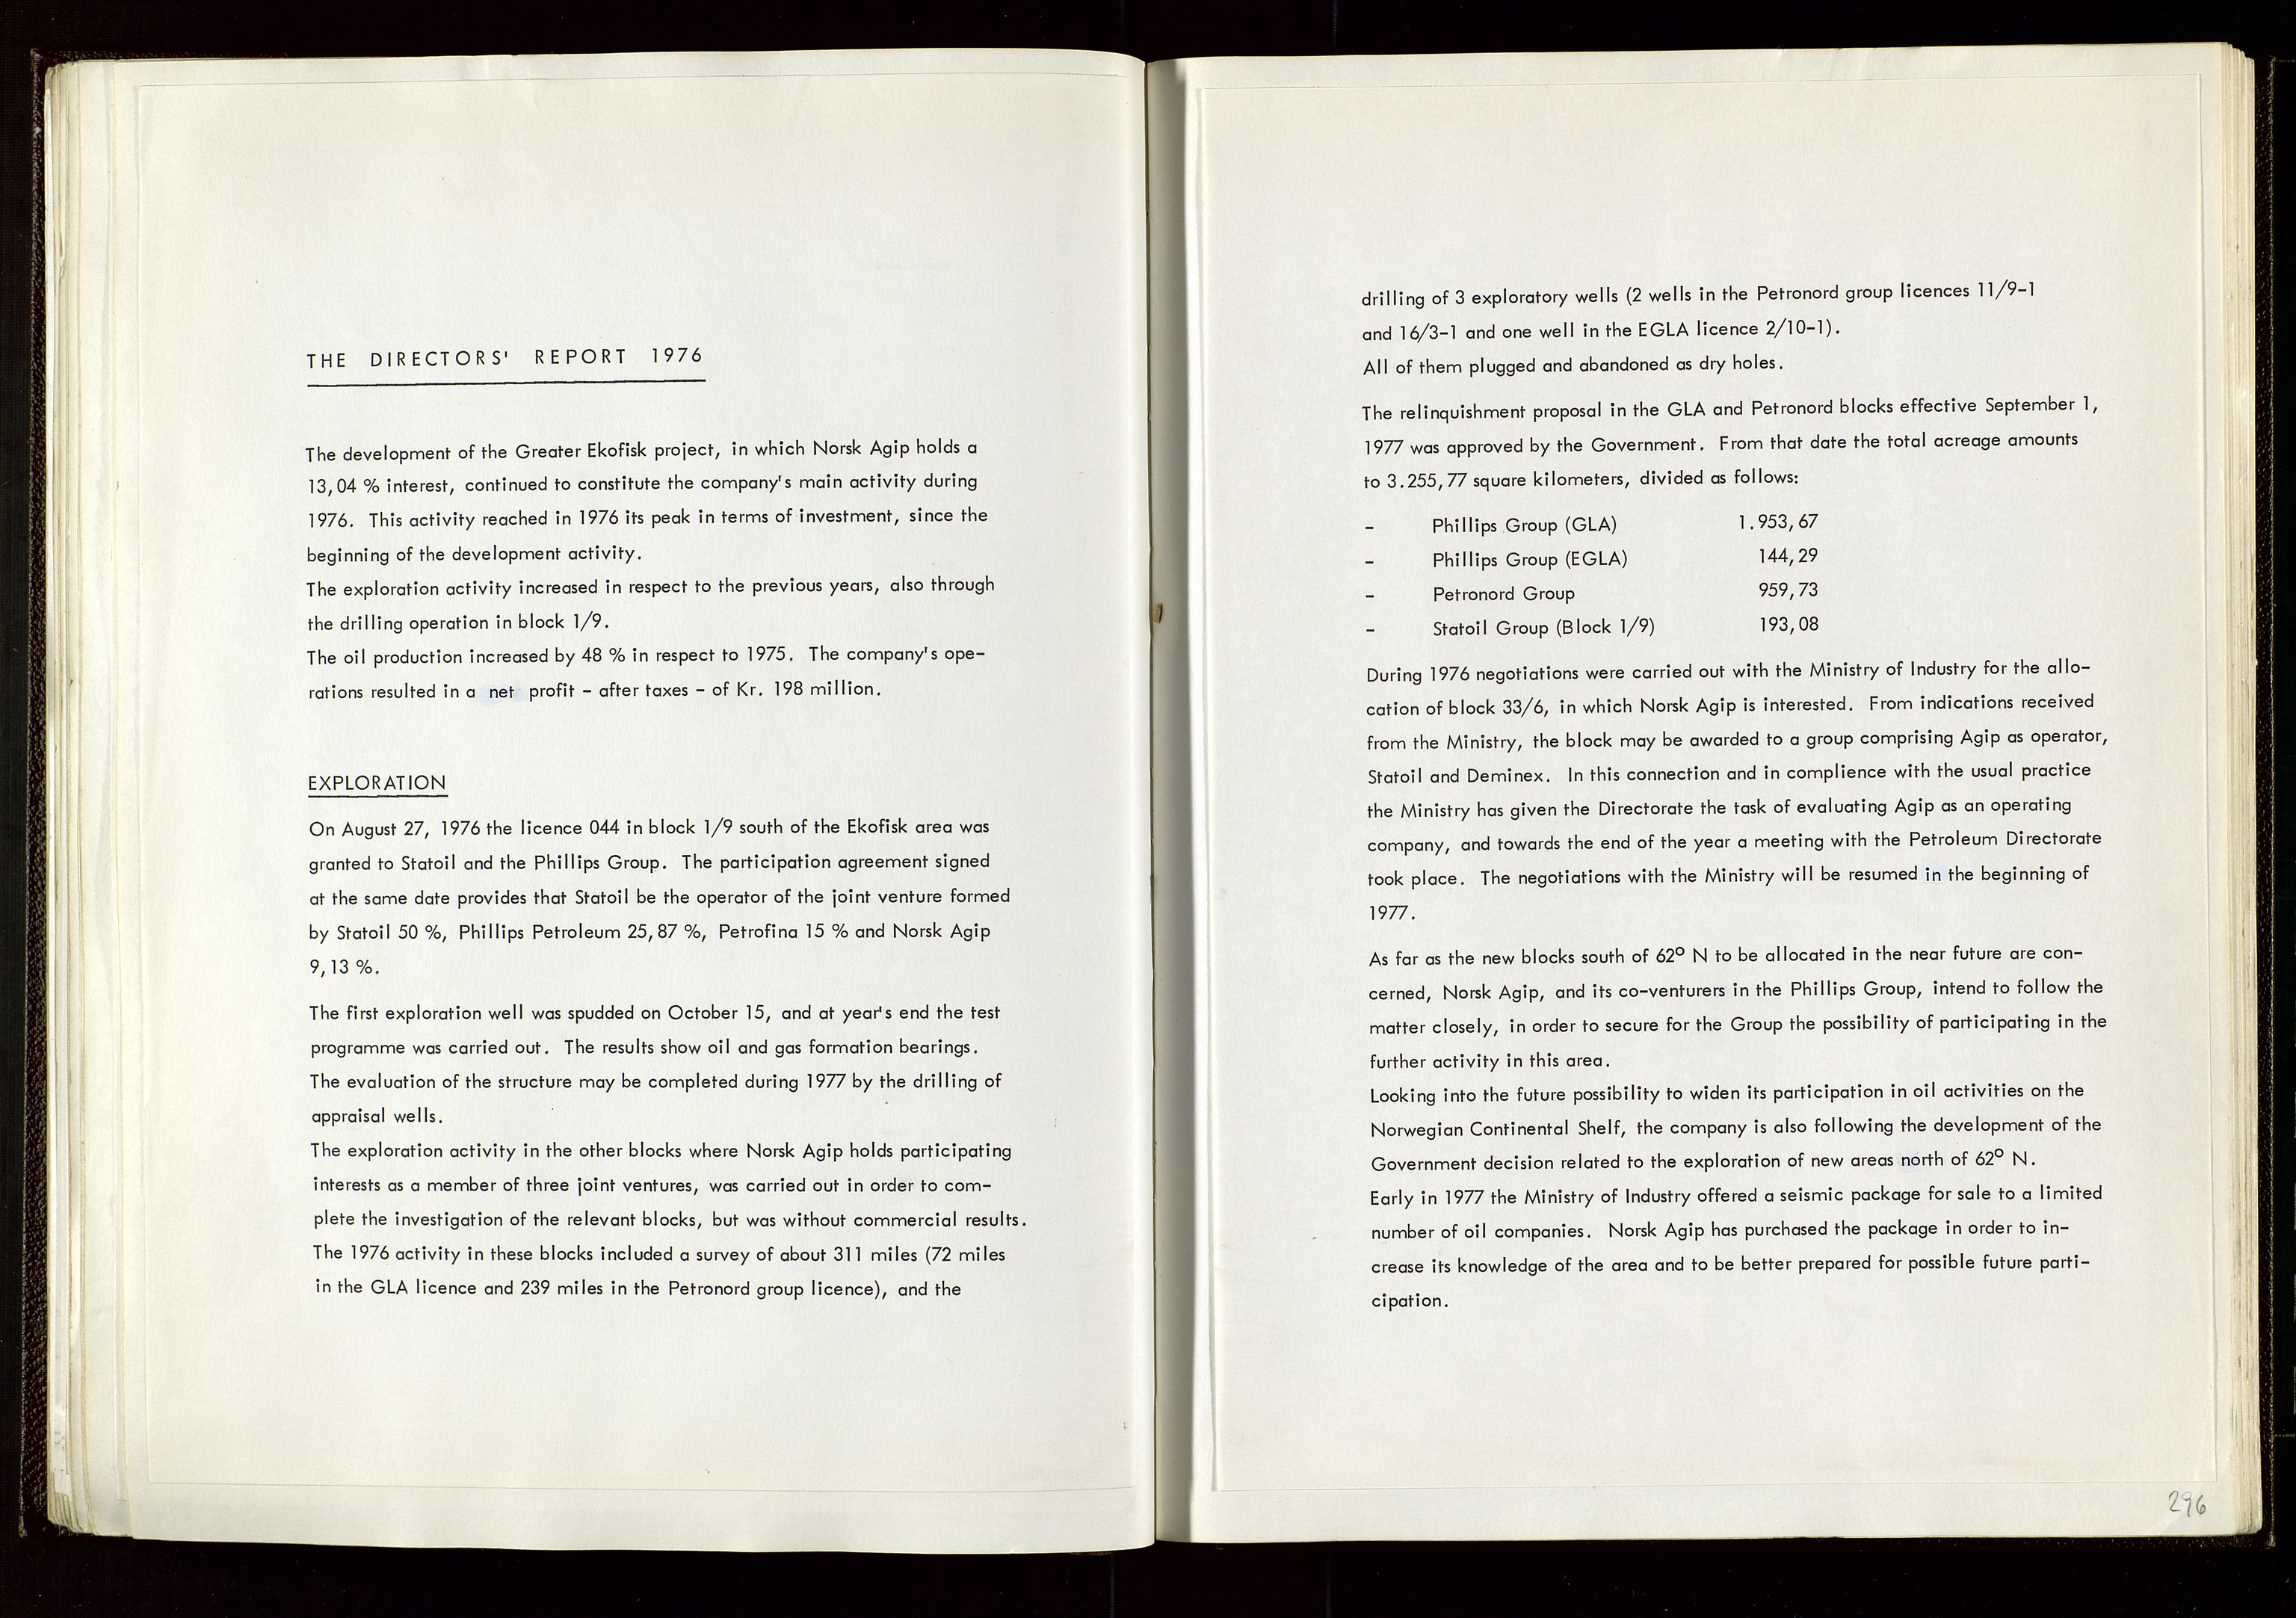 Pa 1583 - Norsk Agip AS, SAST/A-102138/A/Aa/L0002: General assembly and Board of Directors meeting minutes, 1972-1979, s. 295-296